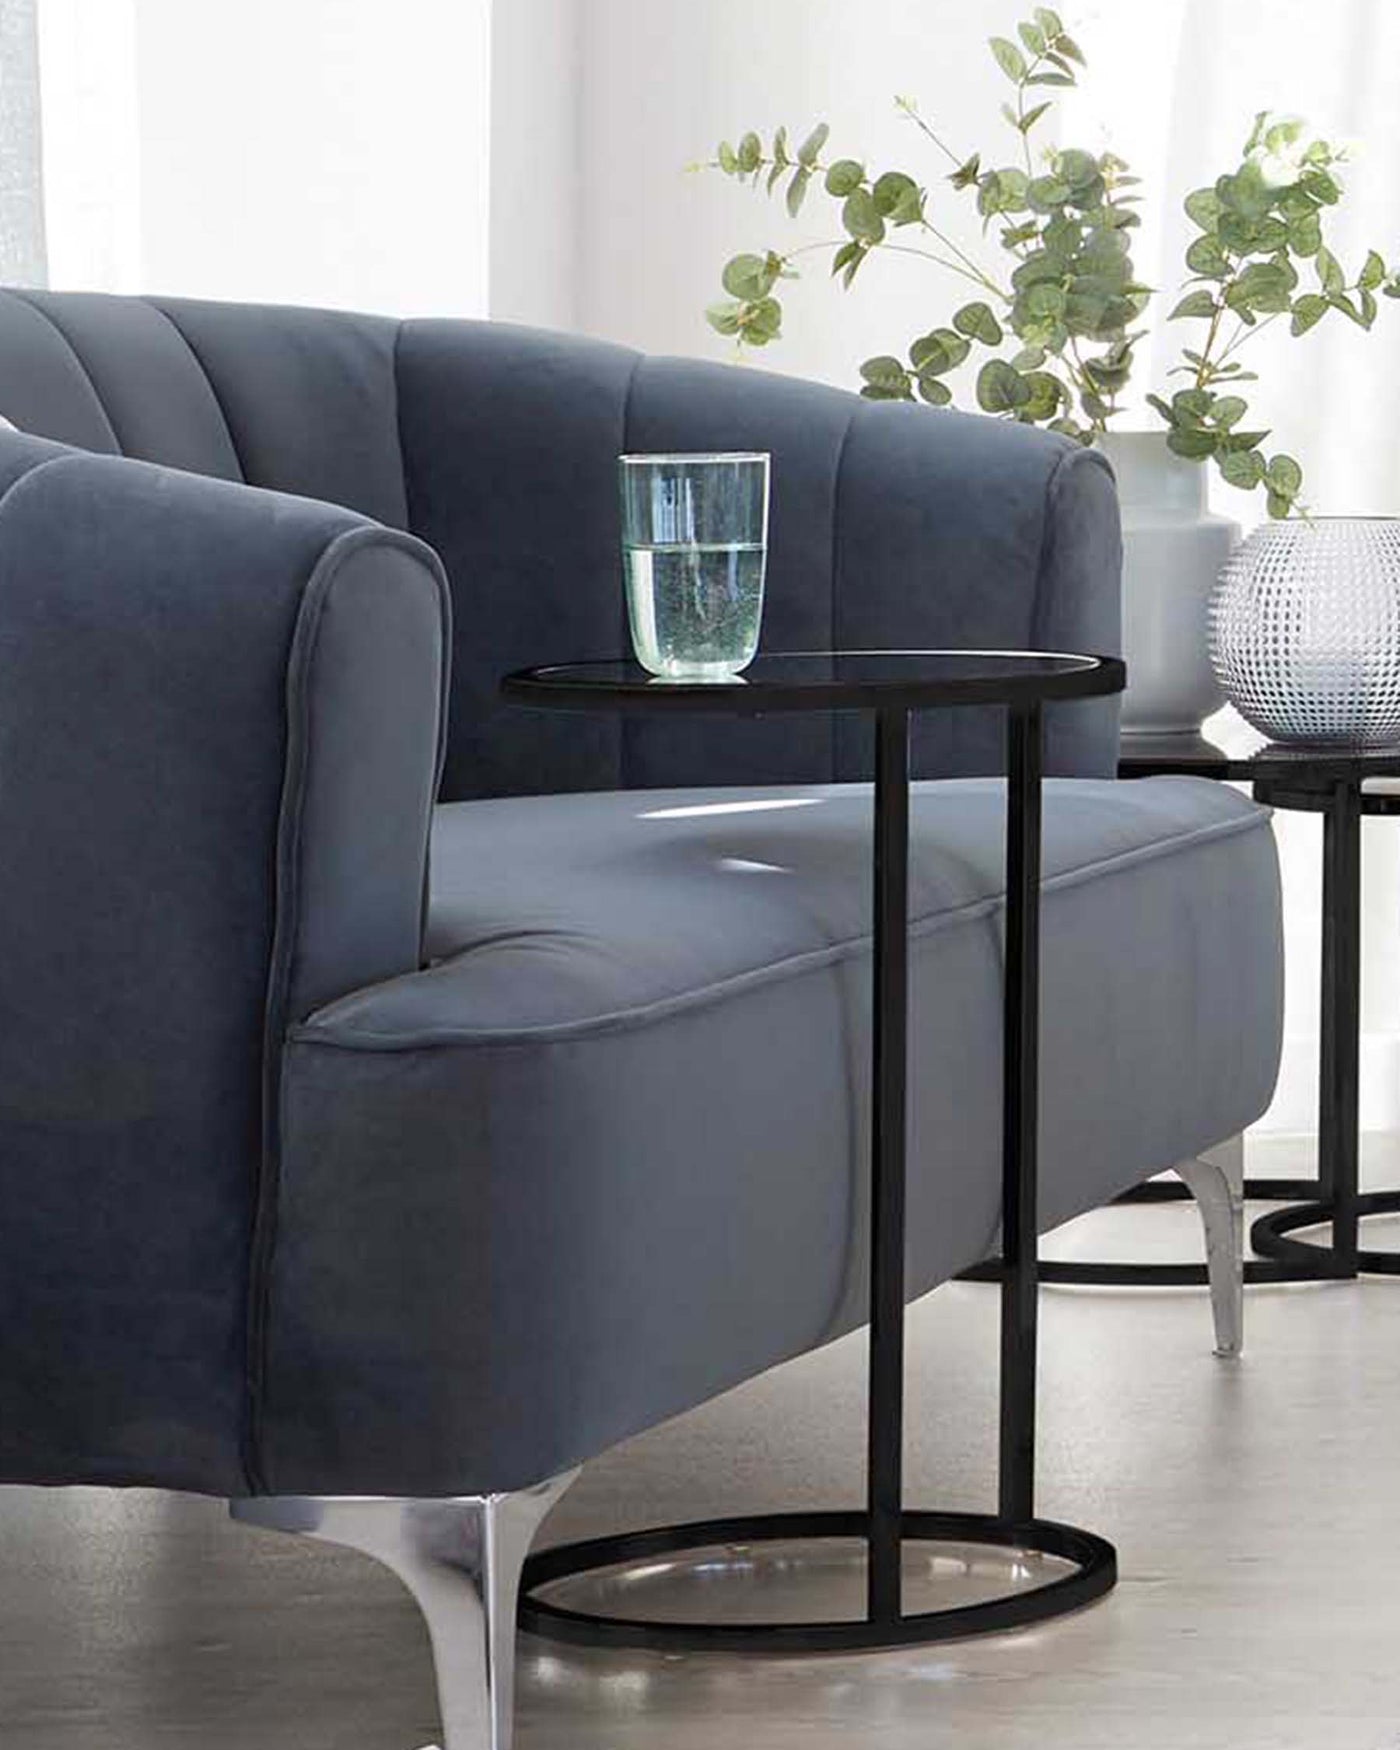 Elegant modern dark grey sofa with vertical channel tufting and sleek metallic silver legs, alongside a round black side table with a glass top and metal base, featuring a cylindrical clear glass vase with water.